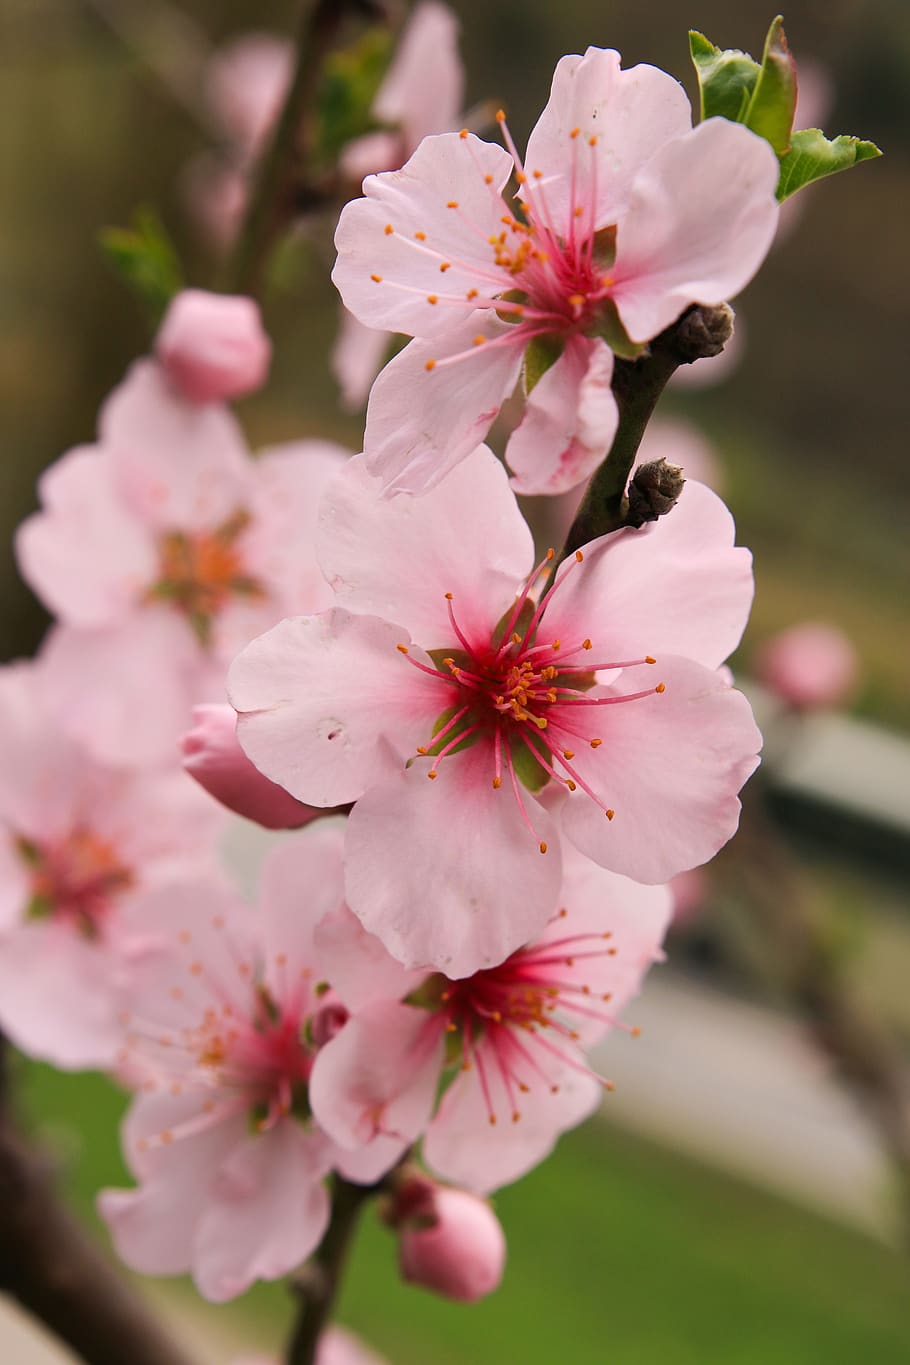 Hd Wallpaper Apple Blossoms Flowers Pink Spring Bloom Close Up Fruit Tree Wallpaper Flare